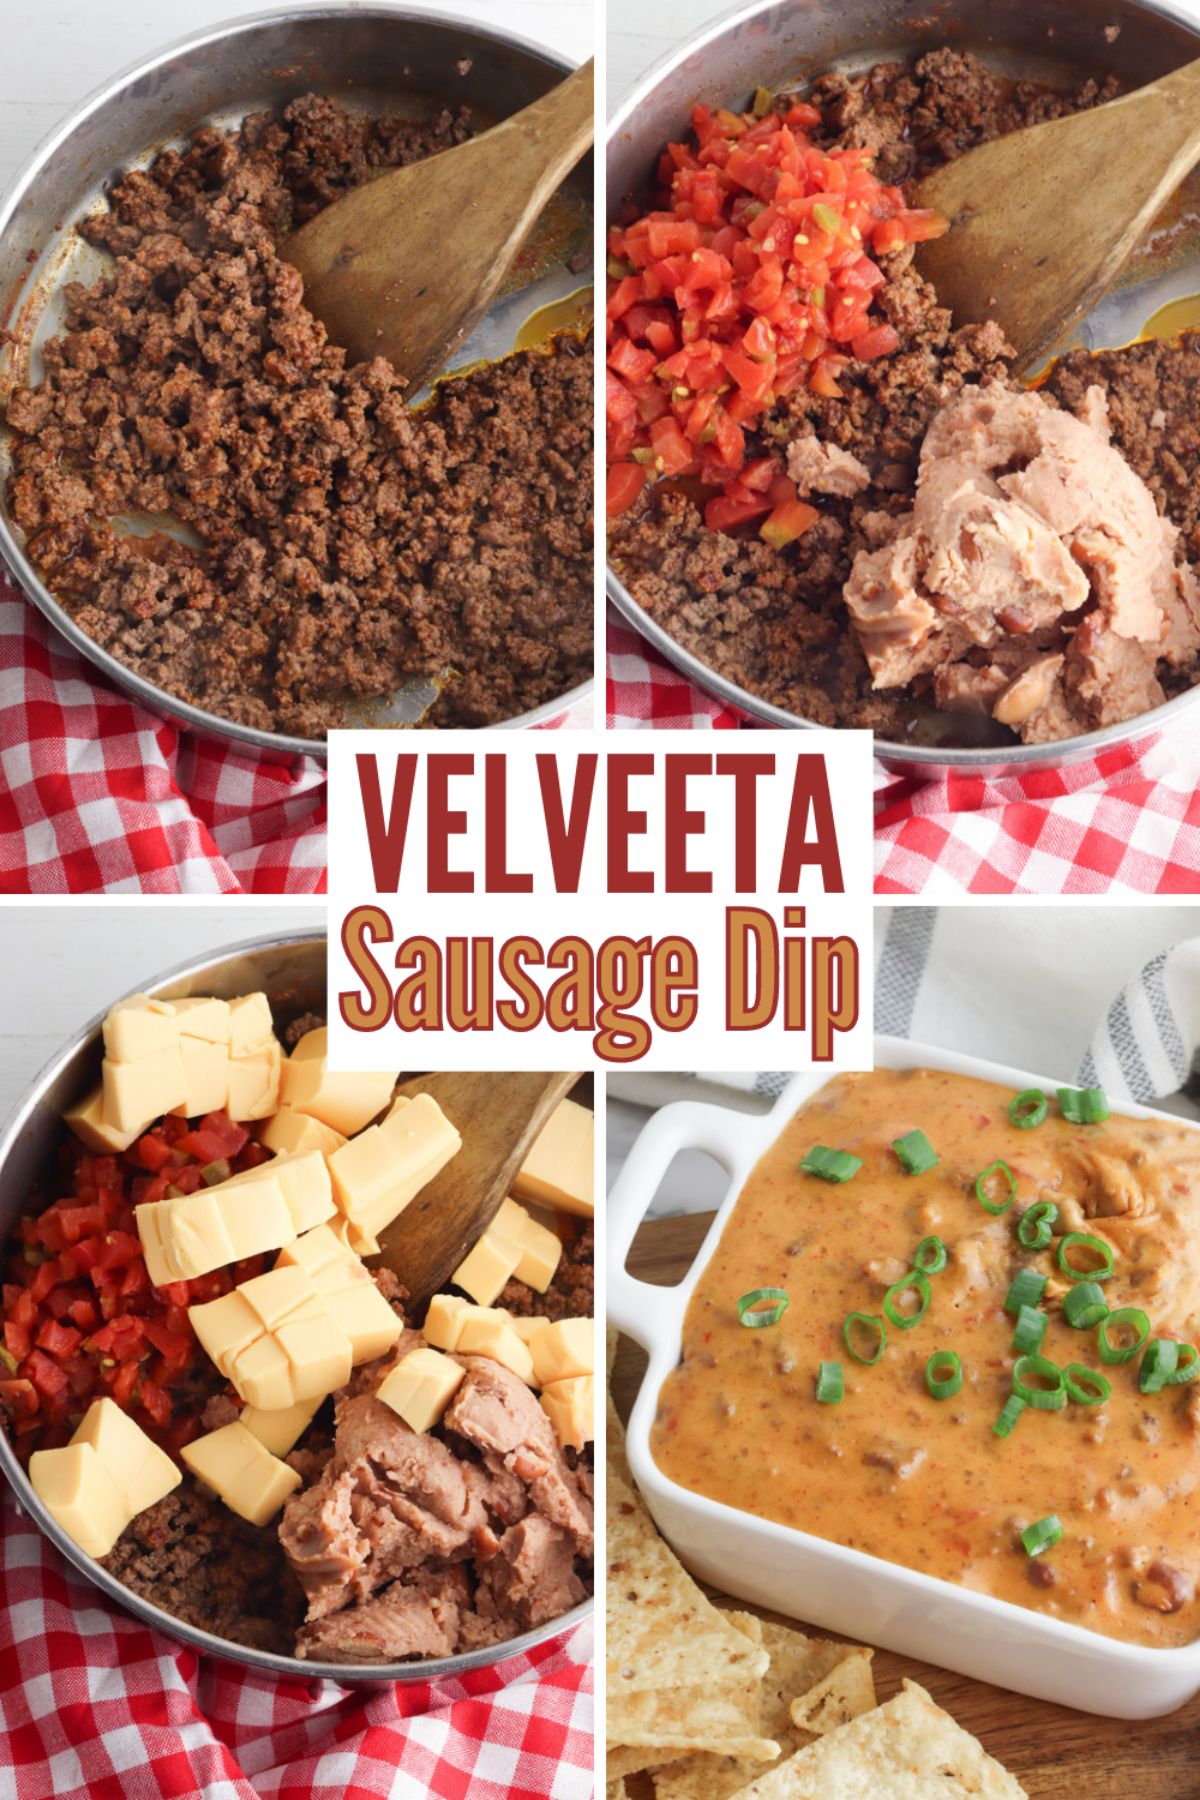 Spice things up with this delectable Rotel Velveeta cheese dip - the perfect cheesy appetizer that's easy to make and always a hit! #velveetasausagedip #appetizer #velveetaroteldip #velveetacheese #velveetasausagecheesedip via @wondermomwannab